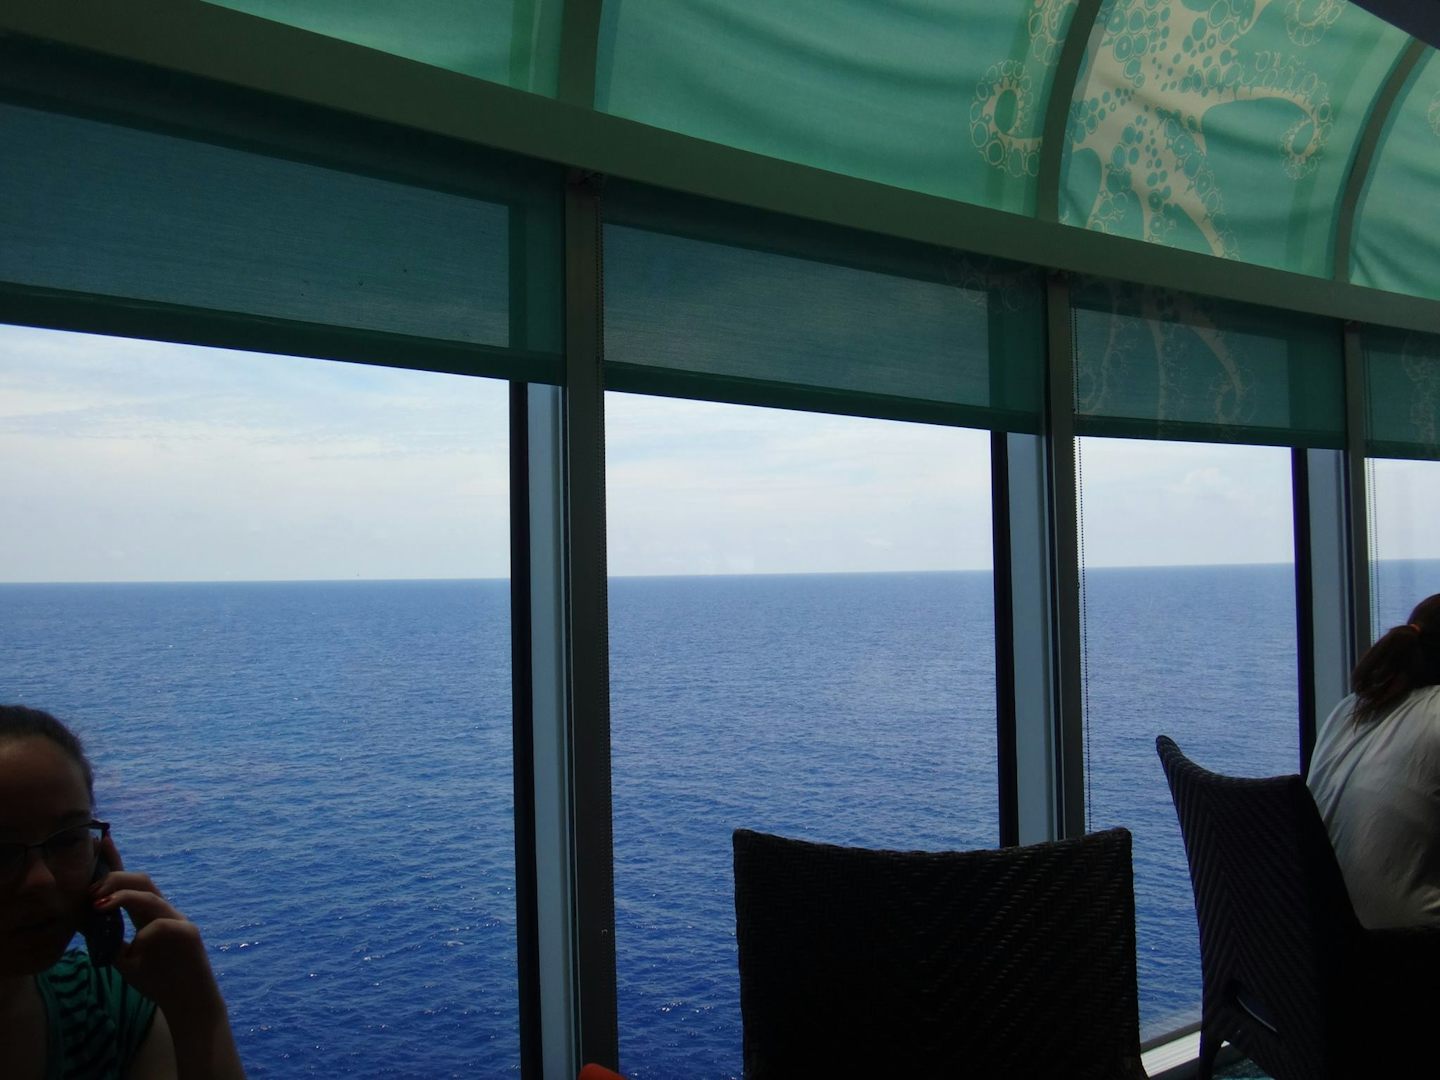 From the buffet at the back of the ship.  Beautiful view from inside as well.